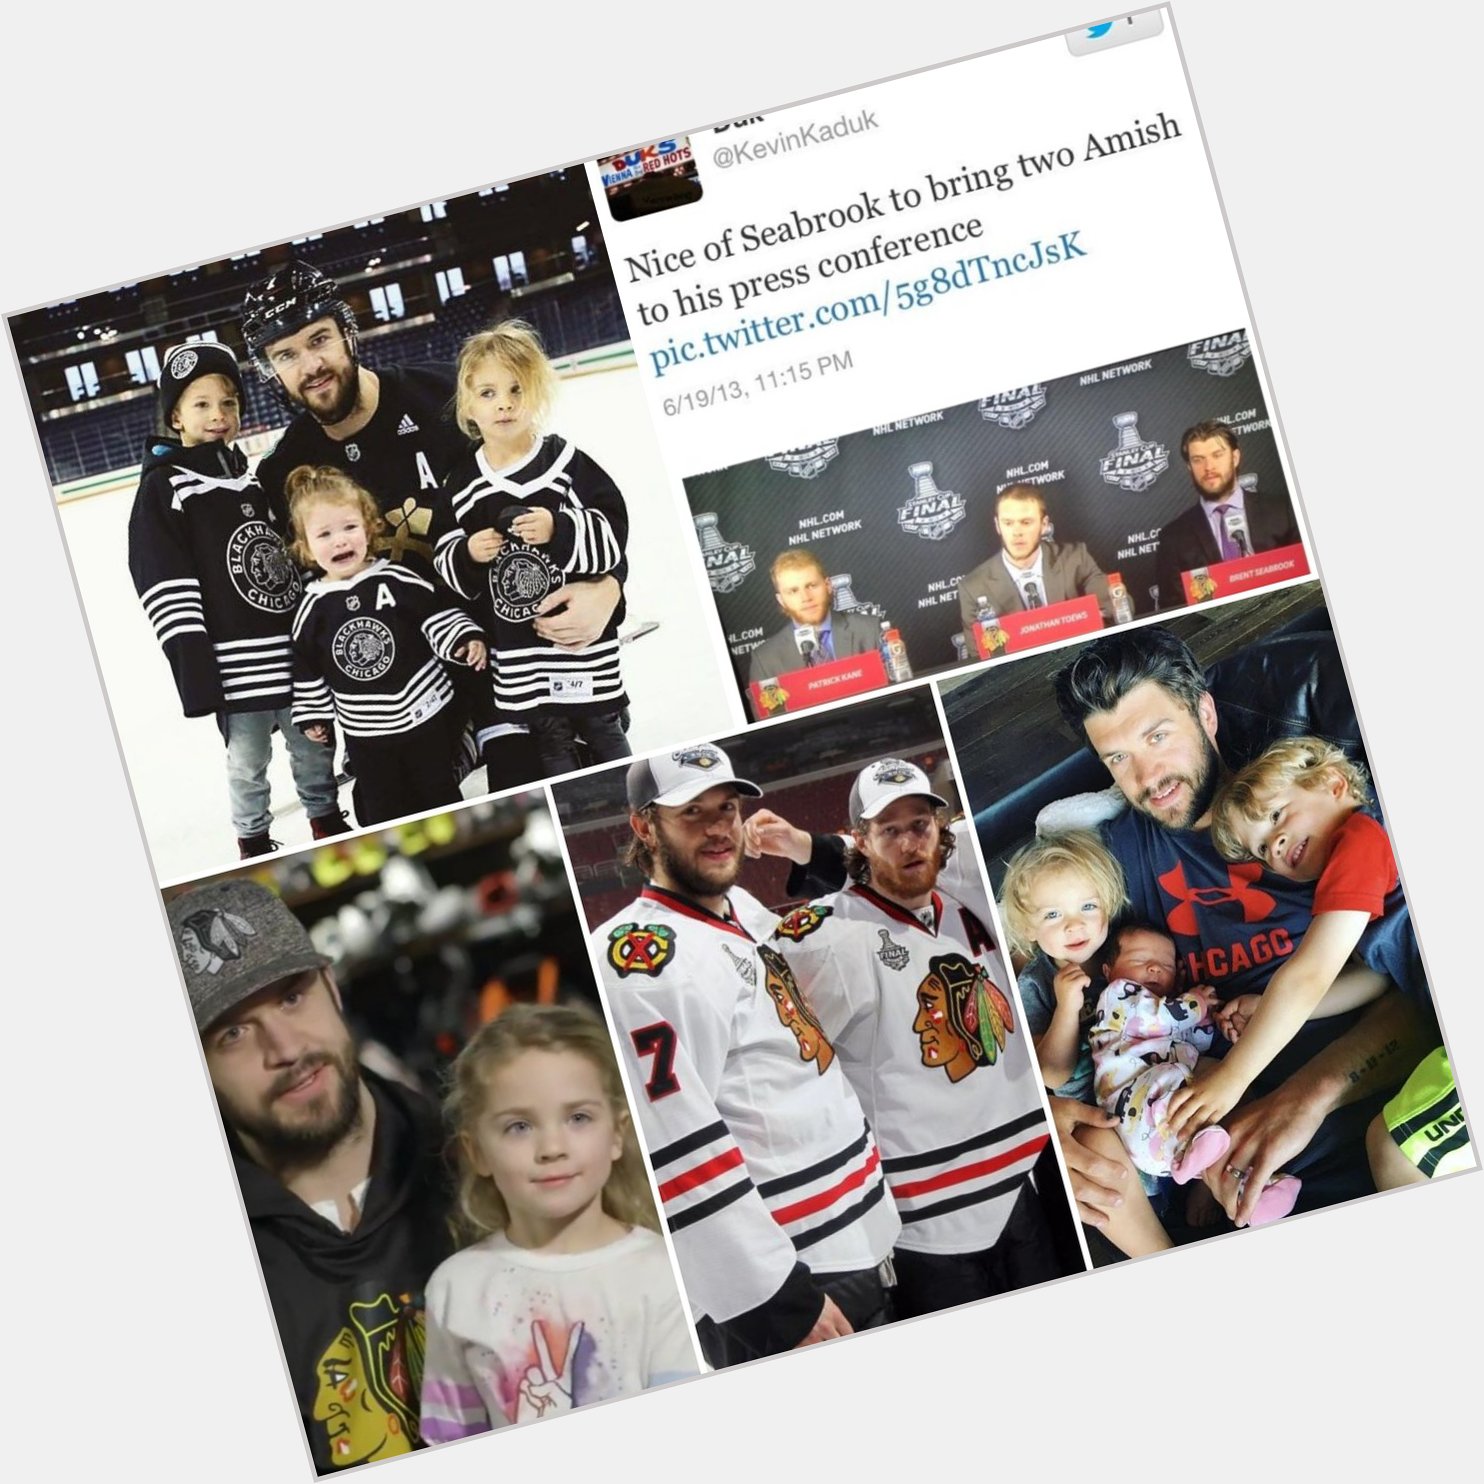 Good morning & HAPPY 36th BIRTHDAY to Brent Seabrook & Brent Seabrook only     